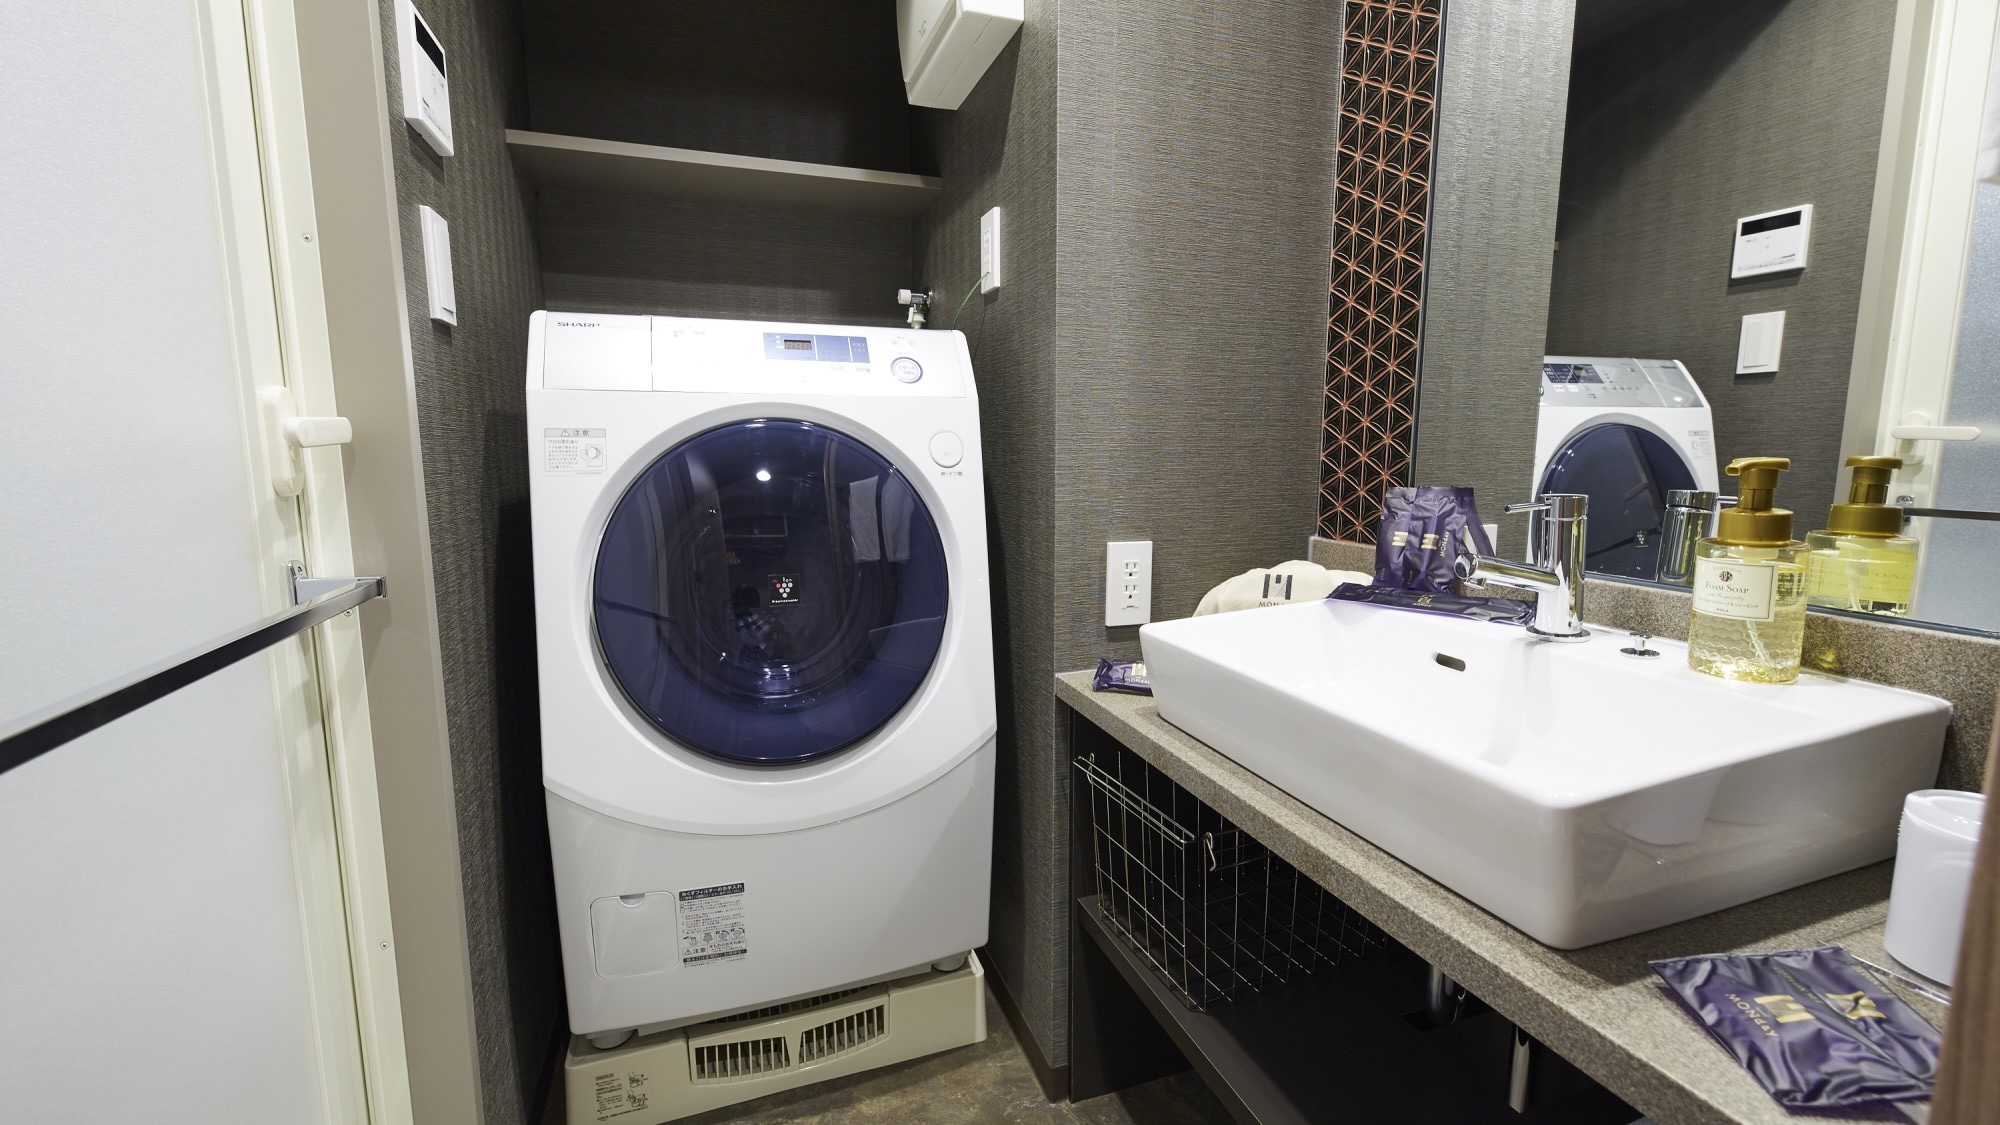 All rooms are equipped with a washer / dryer!